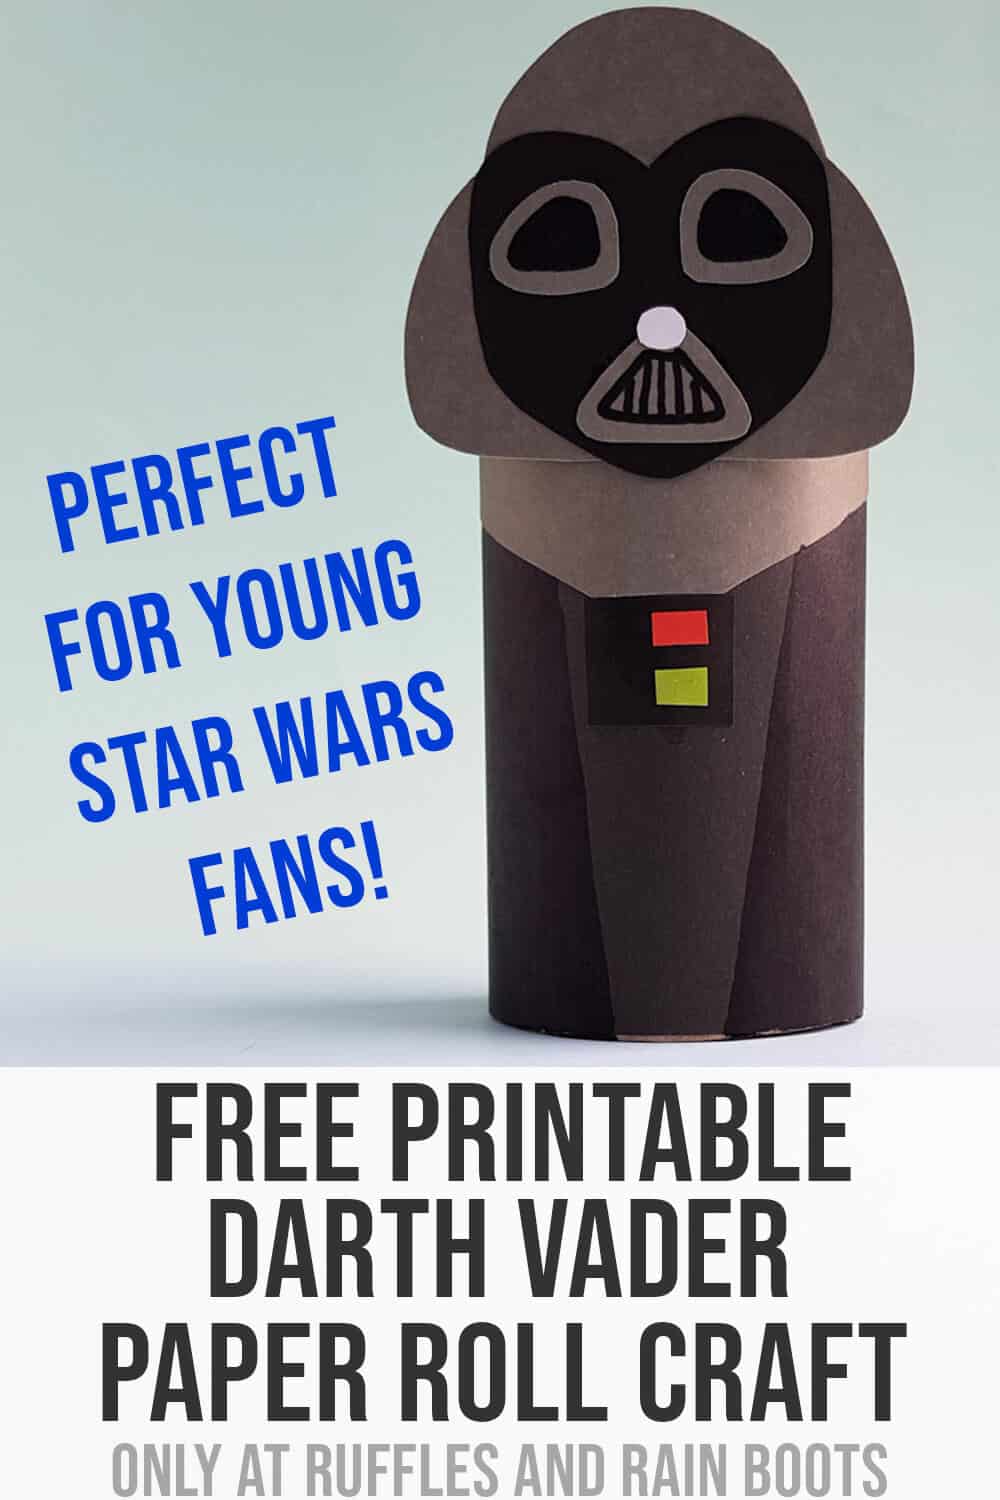 Vertical image of a close up of Darth Vader paper roll with text that says free printable Darth Vader paper roll craft.